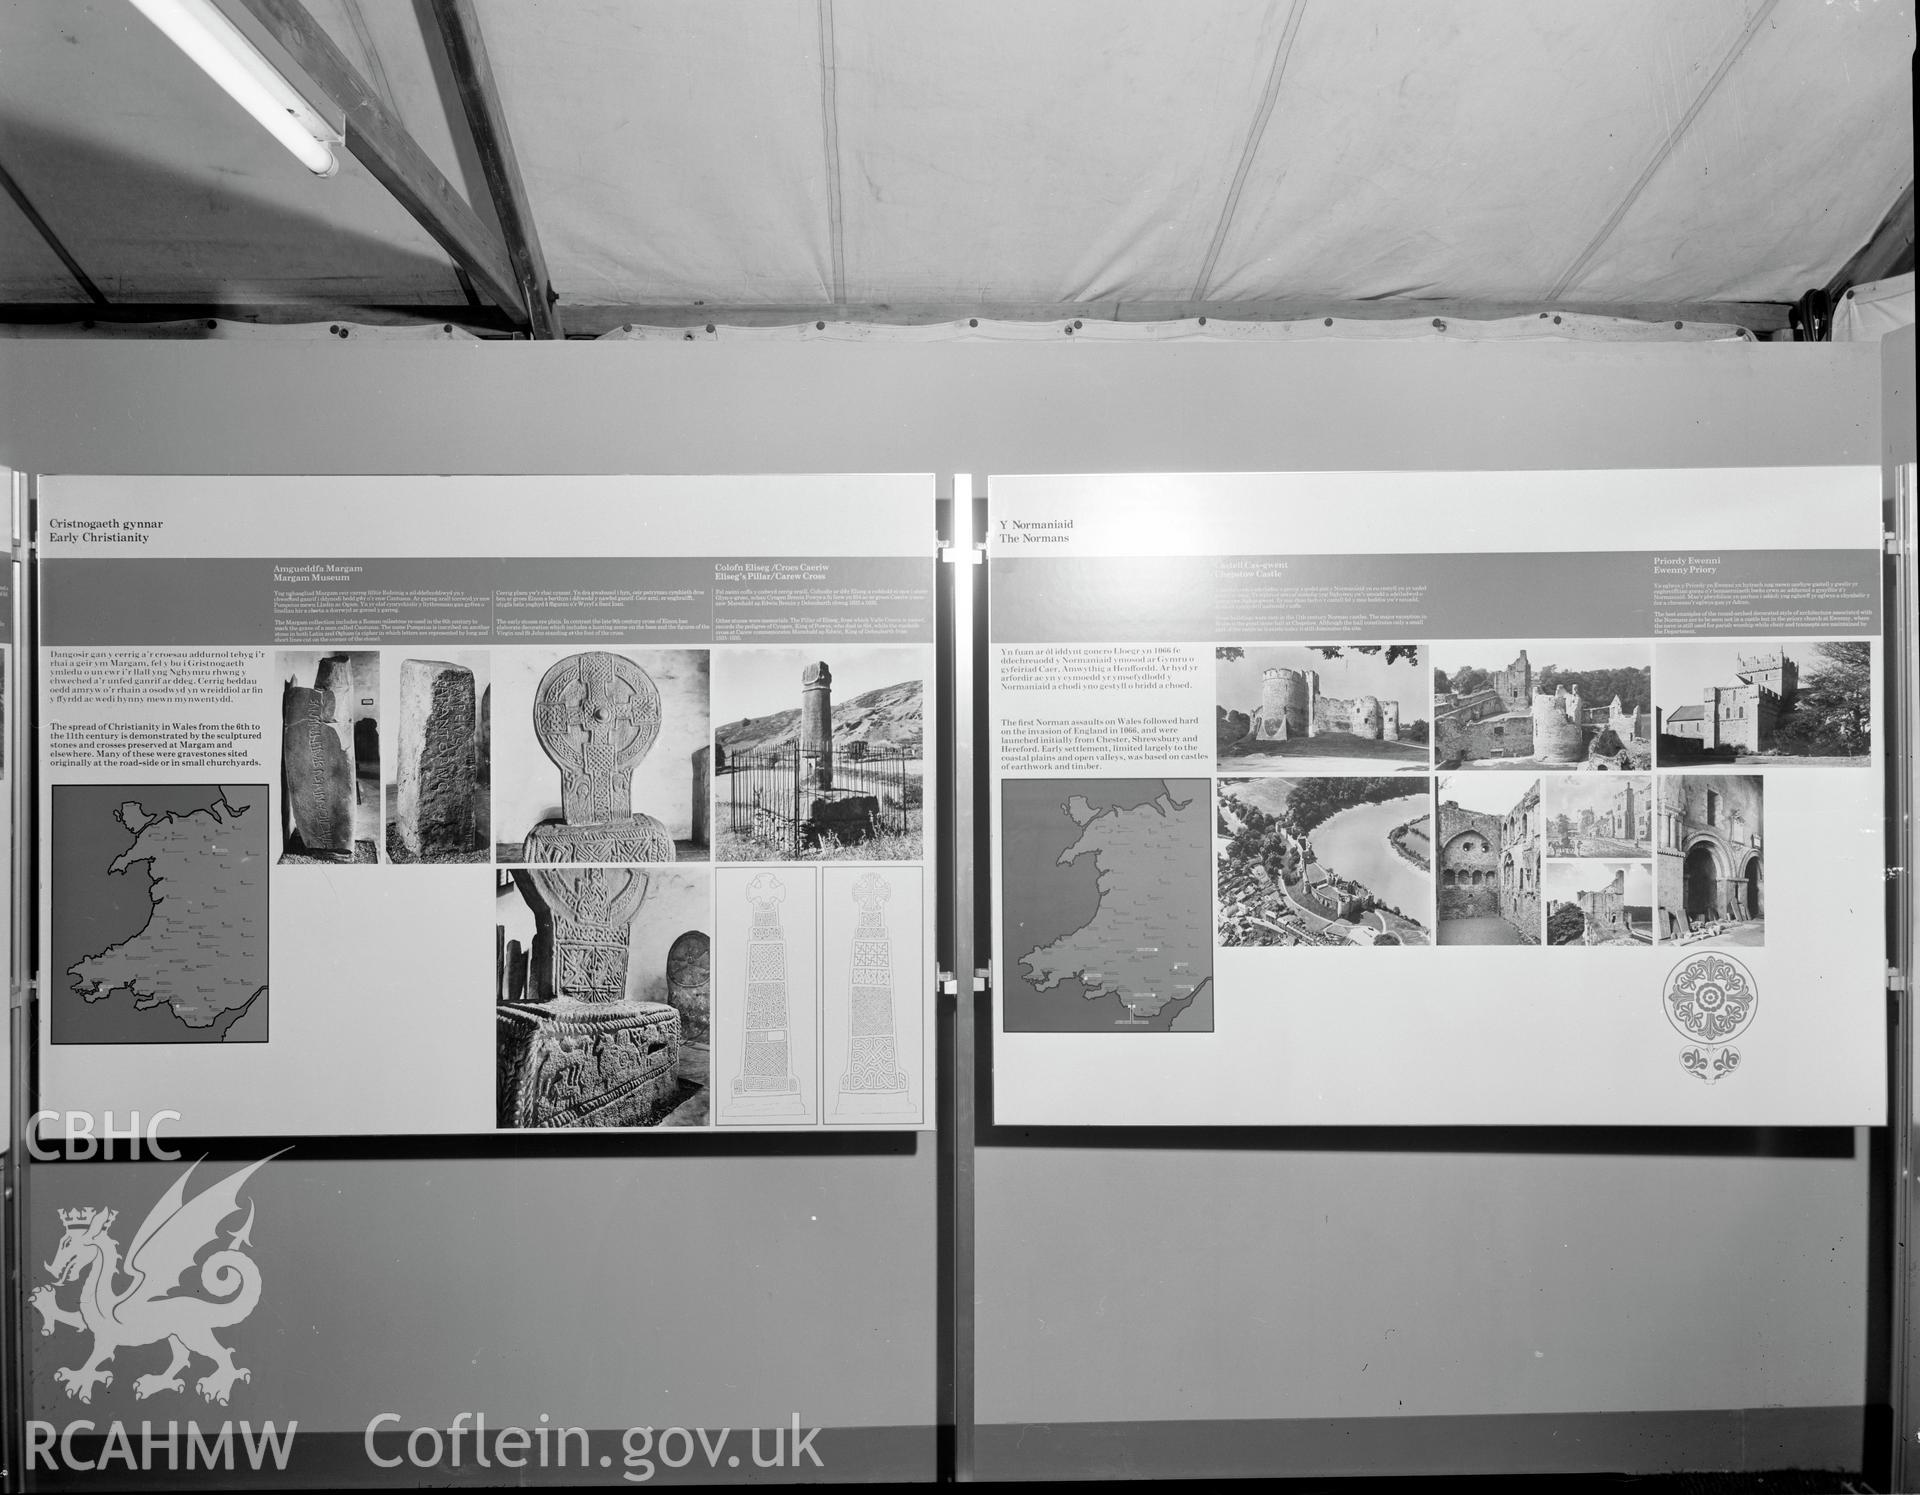 Digitised copy of a black and white negative showing Ancient Monuments Exhibition, Welsh Tourer, Haverfordwest (Eisteddfod Site).